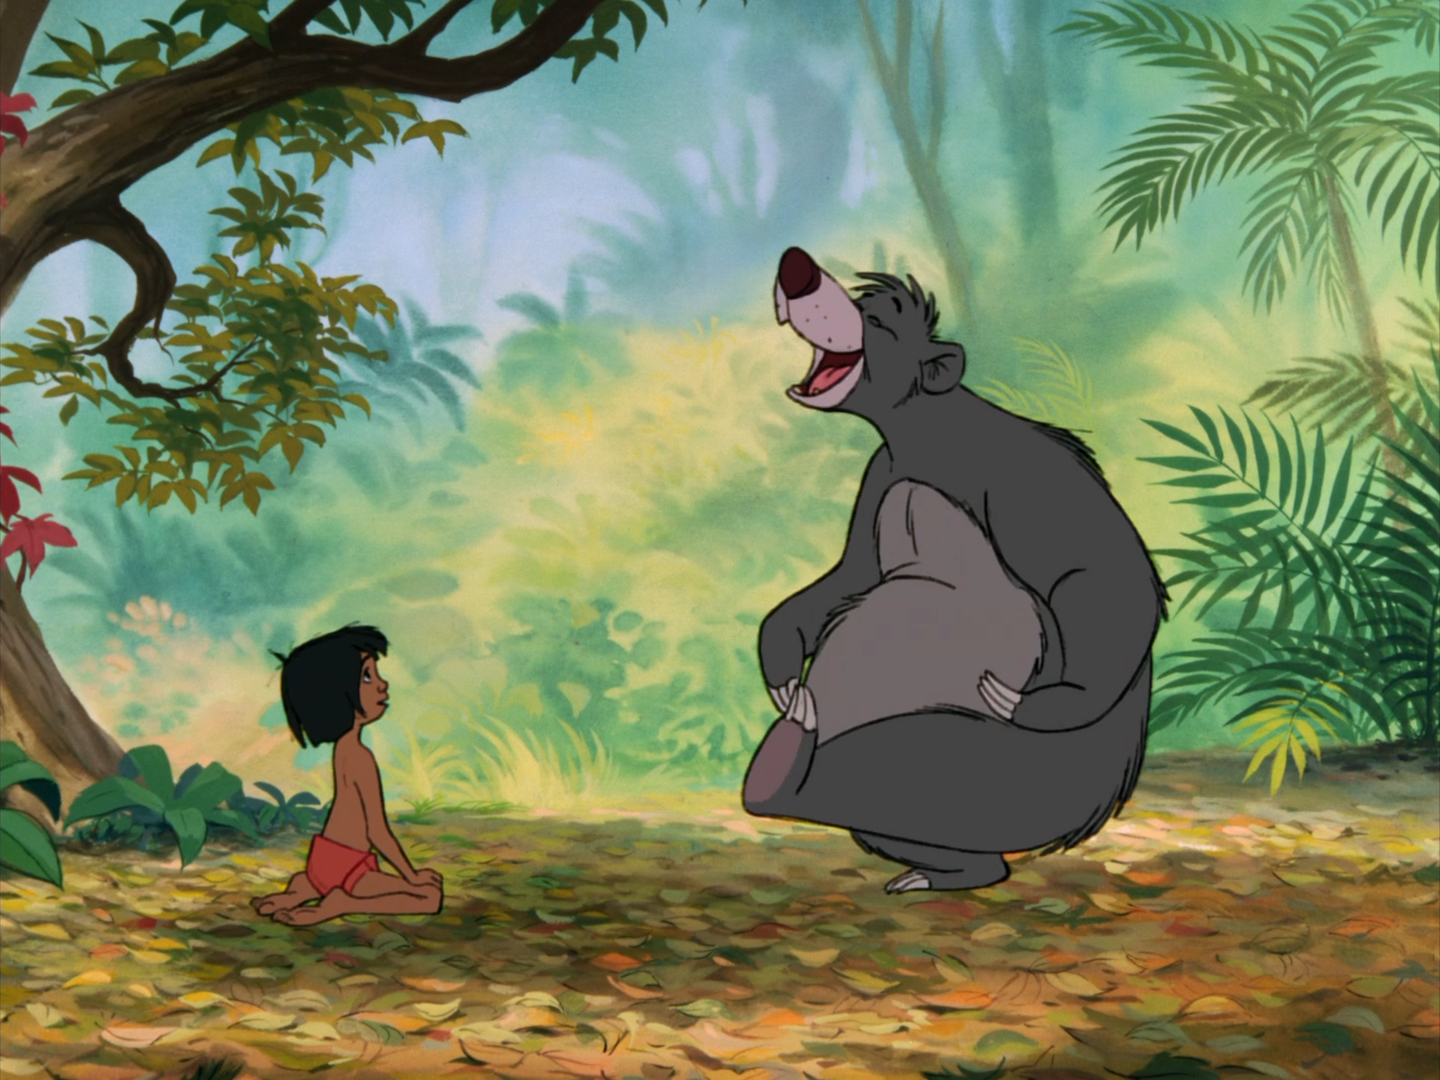 What are Bare Necessities?